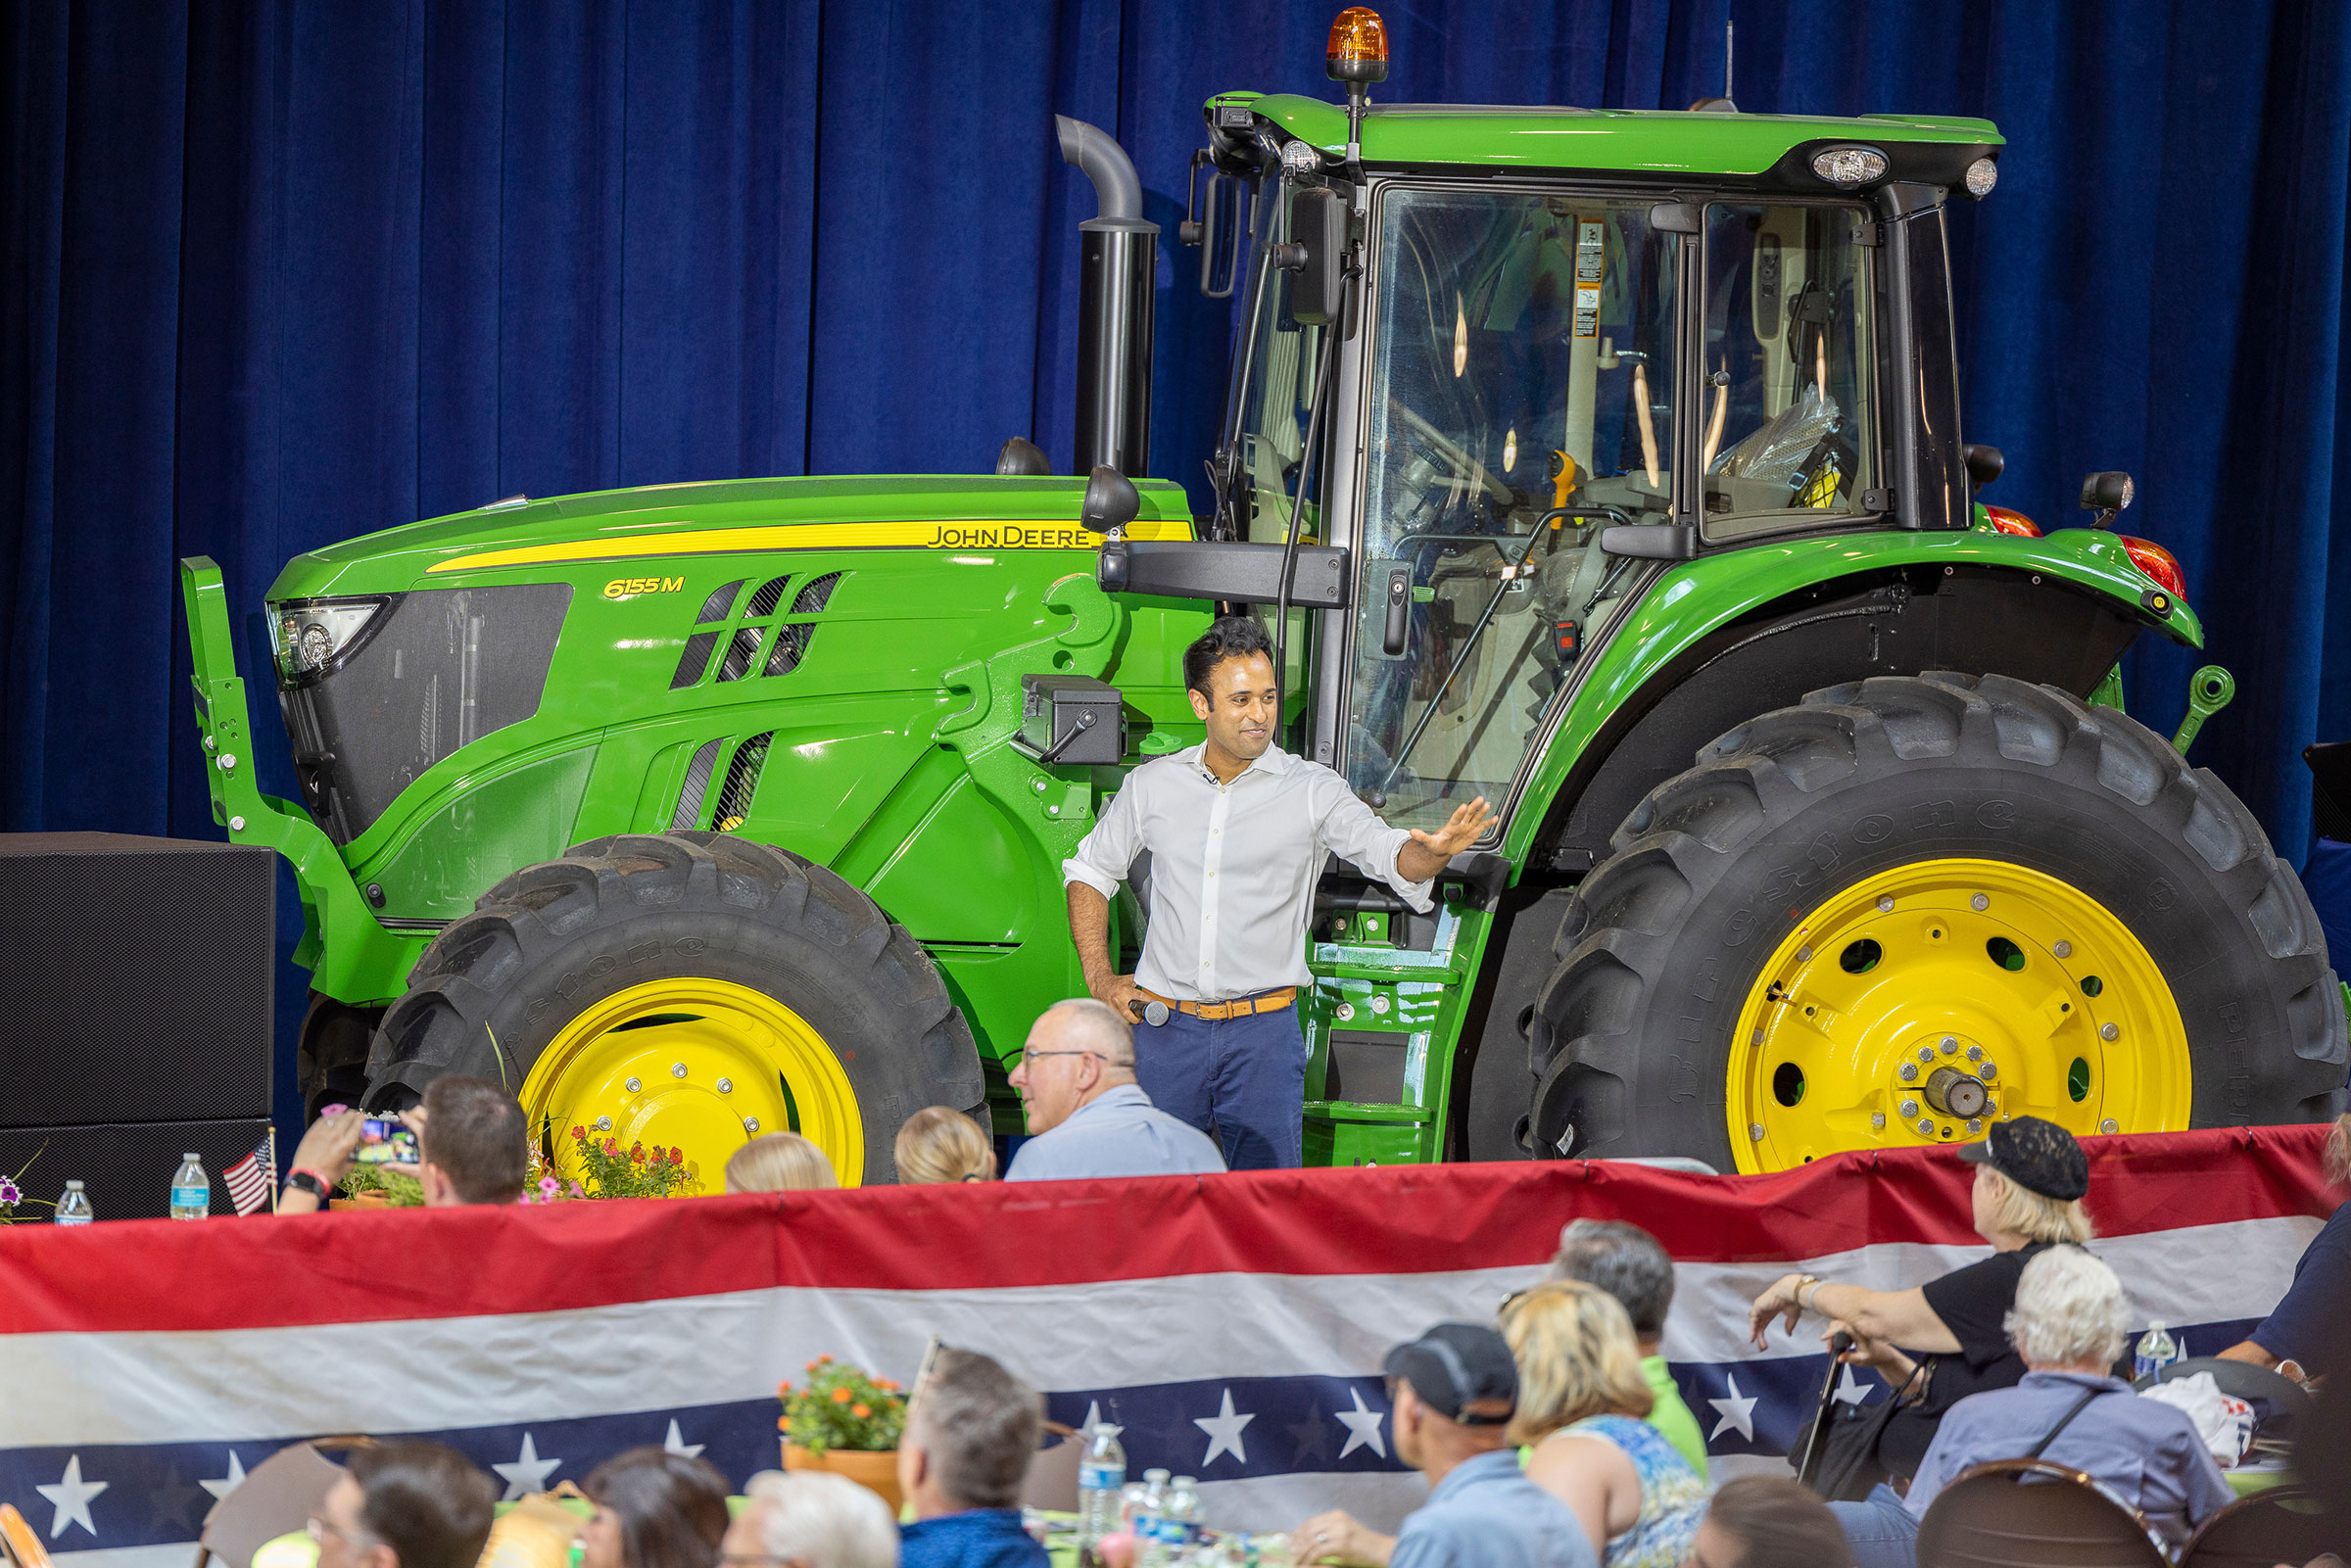 Ramaswamy stands in front of a large green tractor as he waves to supporters in a crowd in front of him